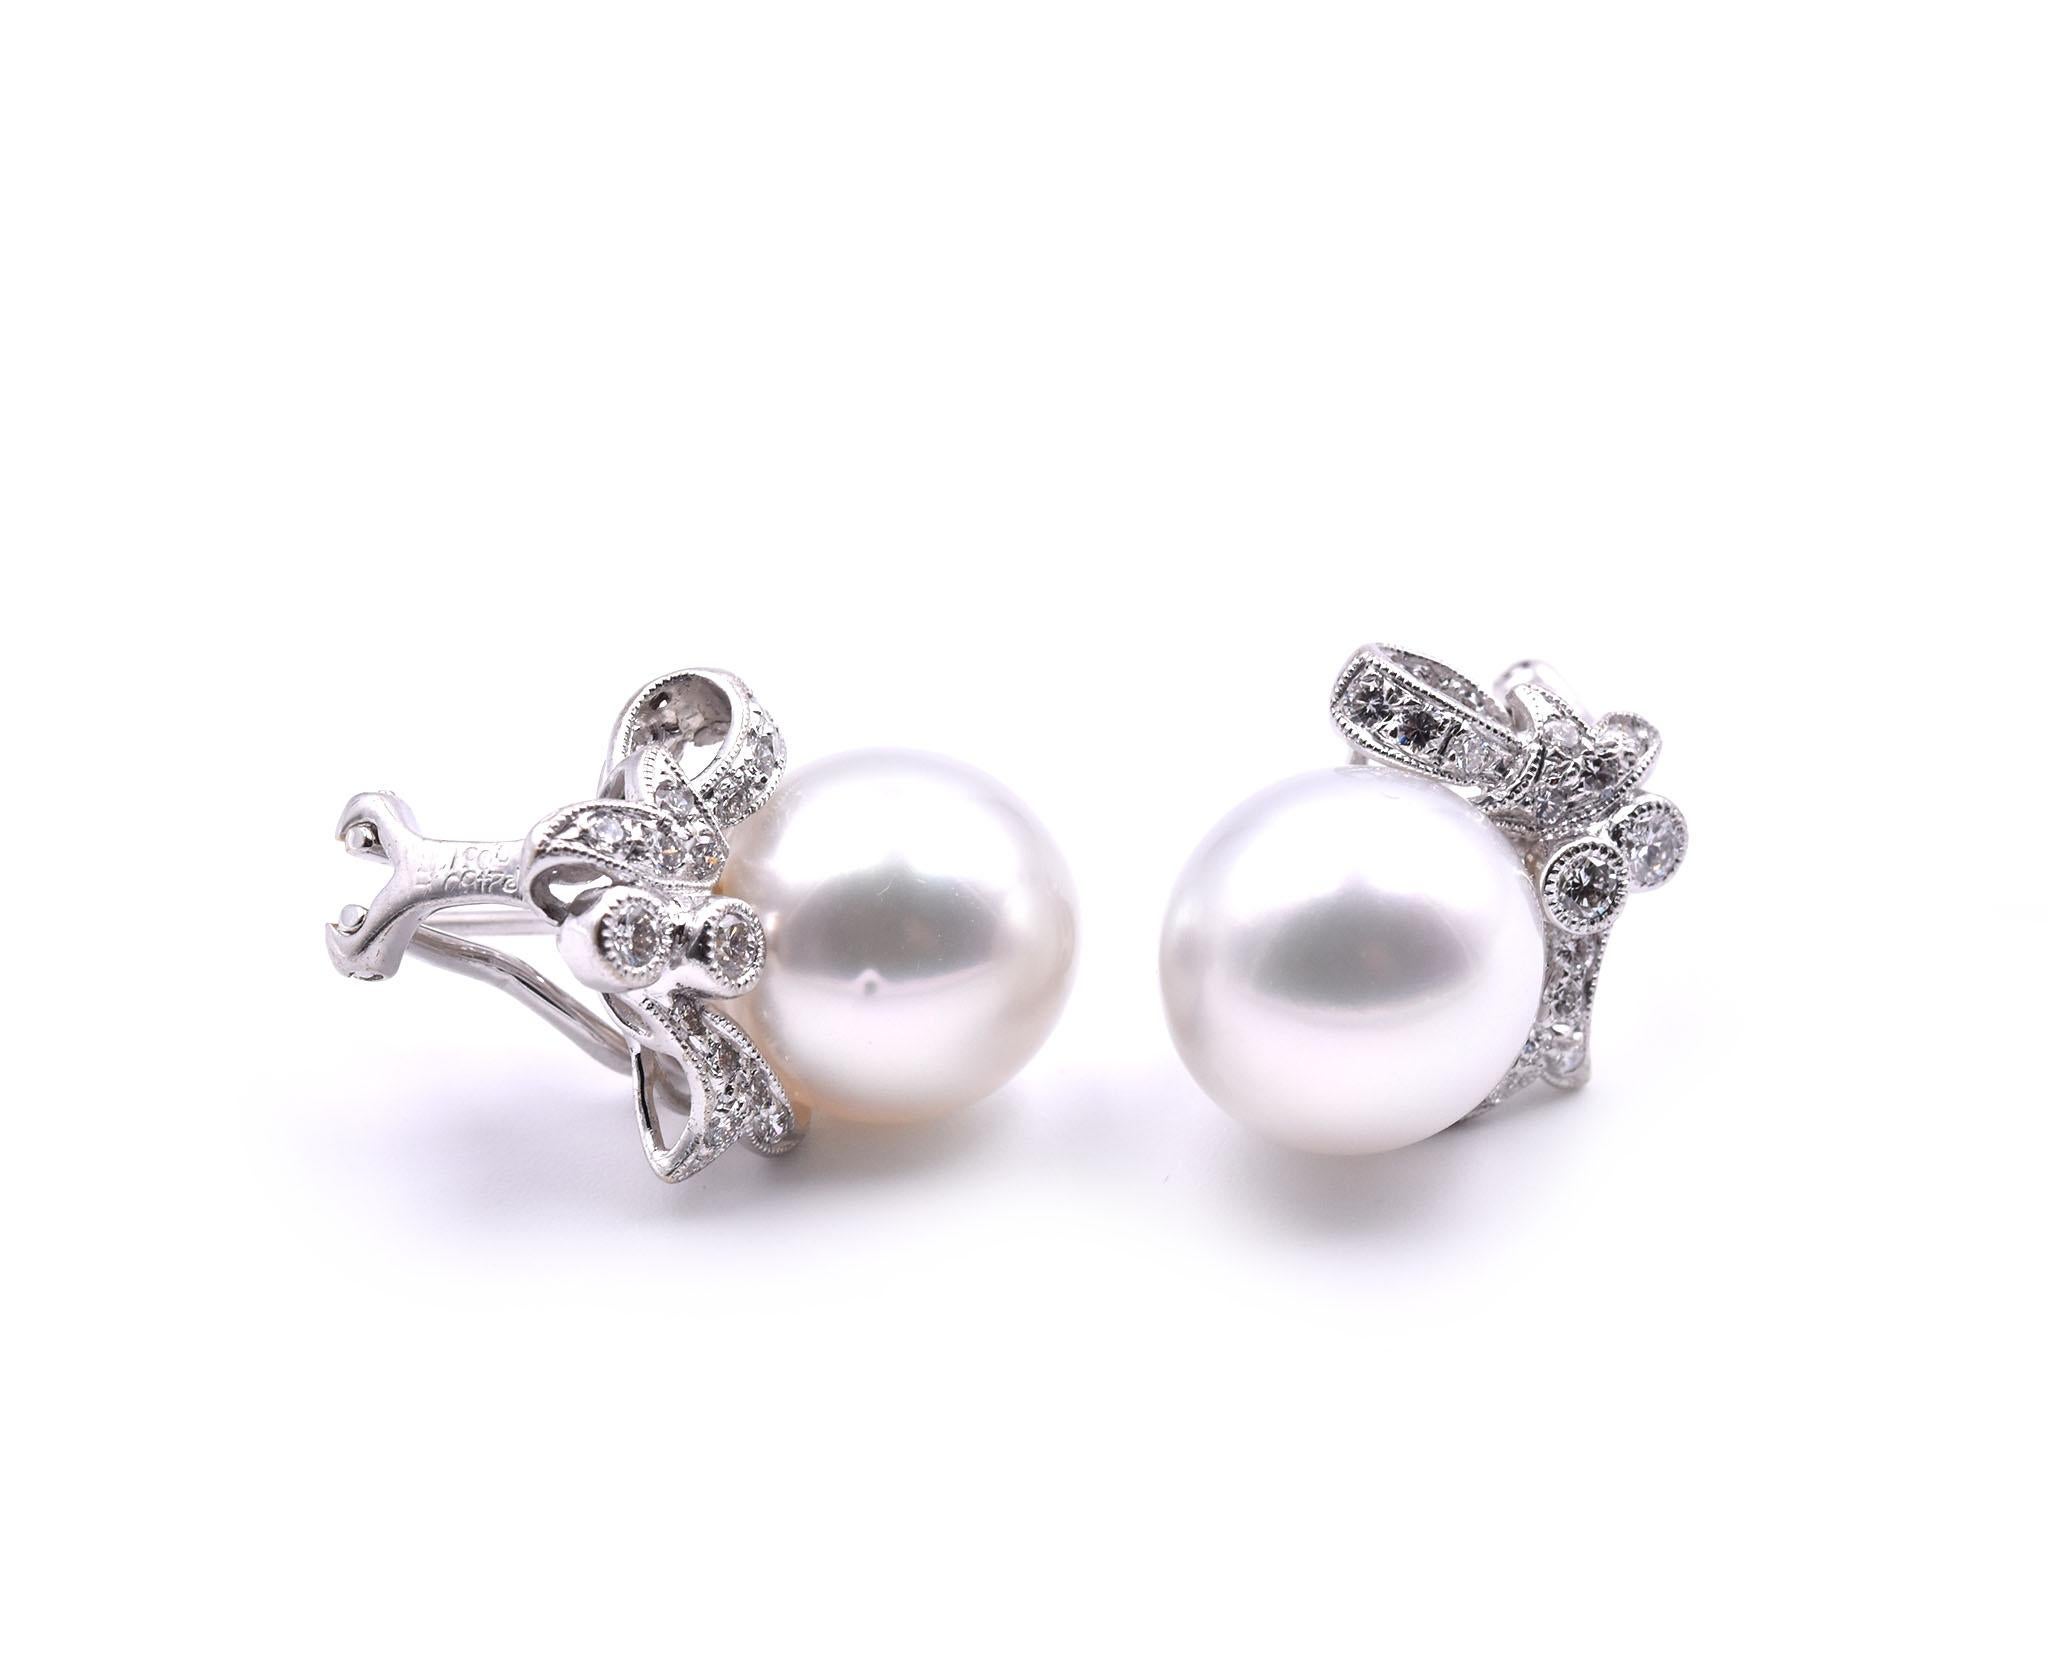 Designer: custom design
Material: 18k white gold
South Sea Pearls: 2 pearls approximate diameter is 12mm
Diamonds: round brilliant cut= .25cttw 
Color: G
Clarity: VS
Fastenings: post with Omega backs
Dimensions: each earring is approximately 18.45mm